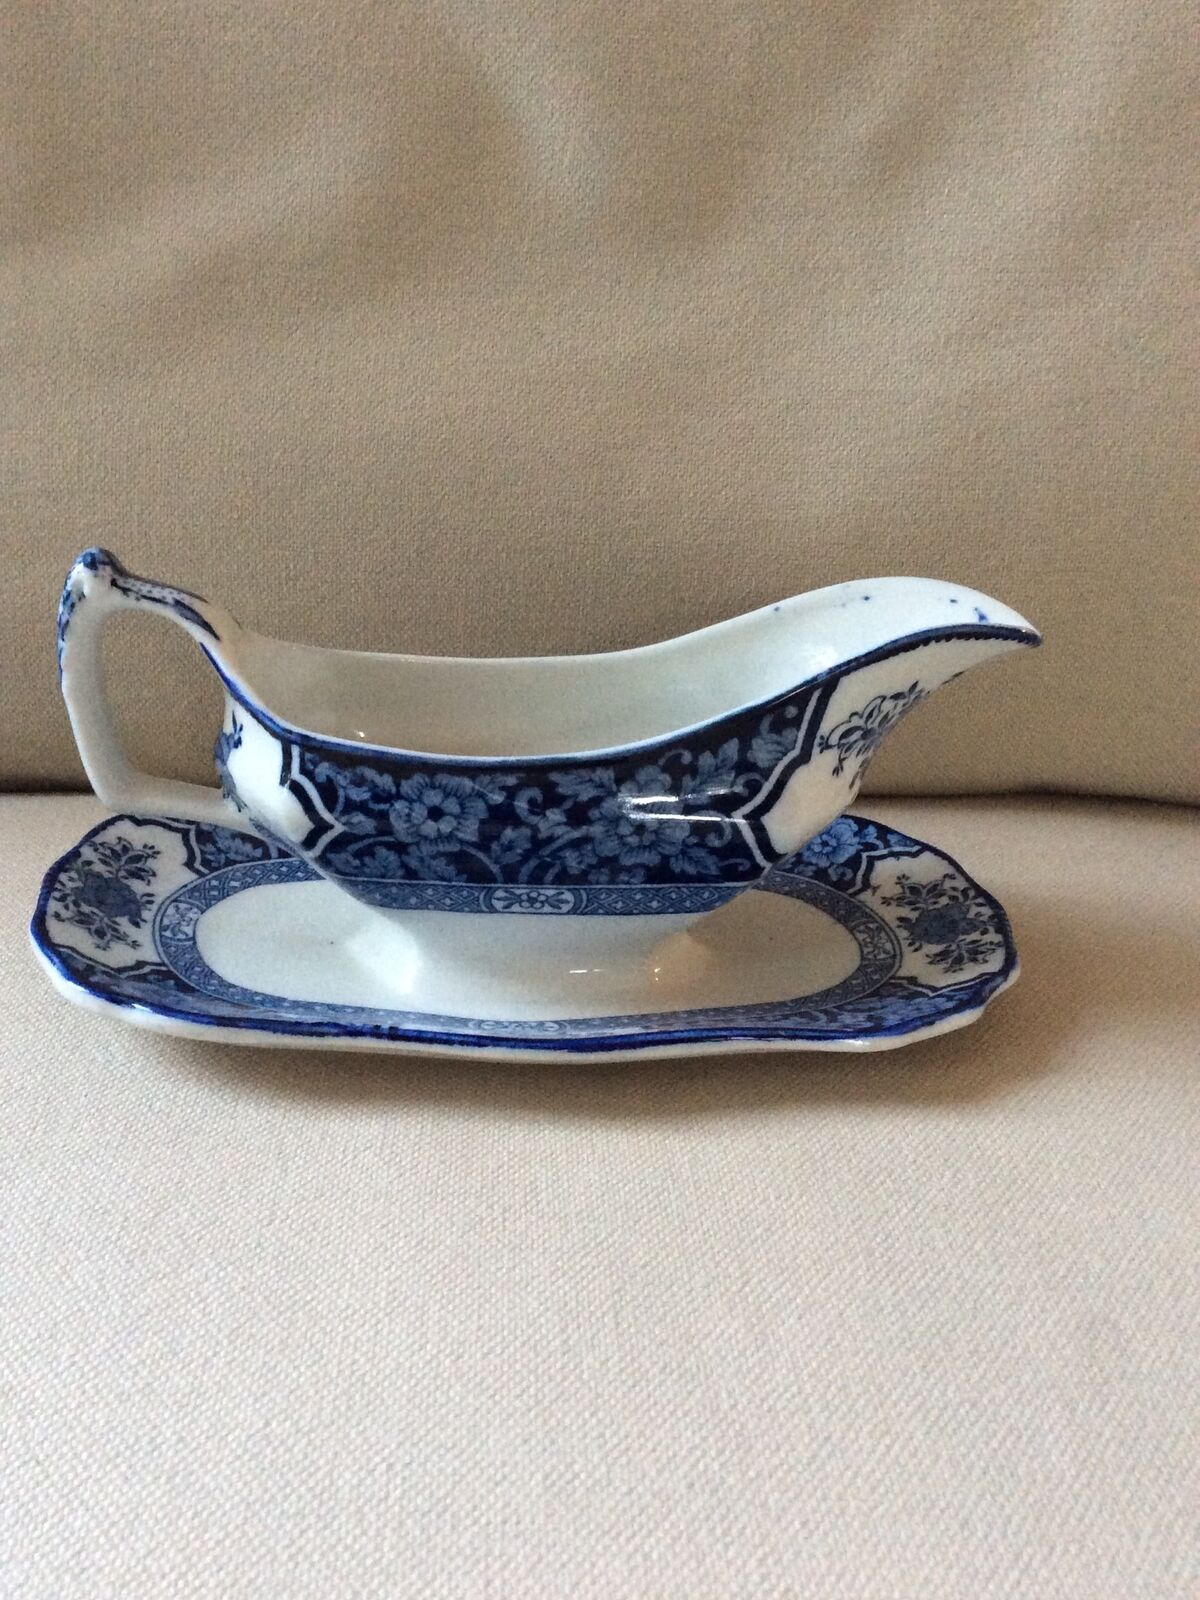 Vintage Wood & Sons Staffordshire Blue Khotan Gravy Boat With Underplate